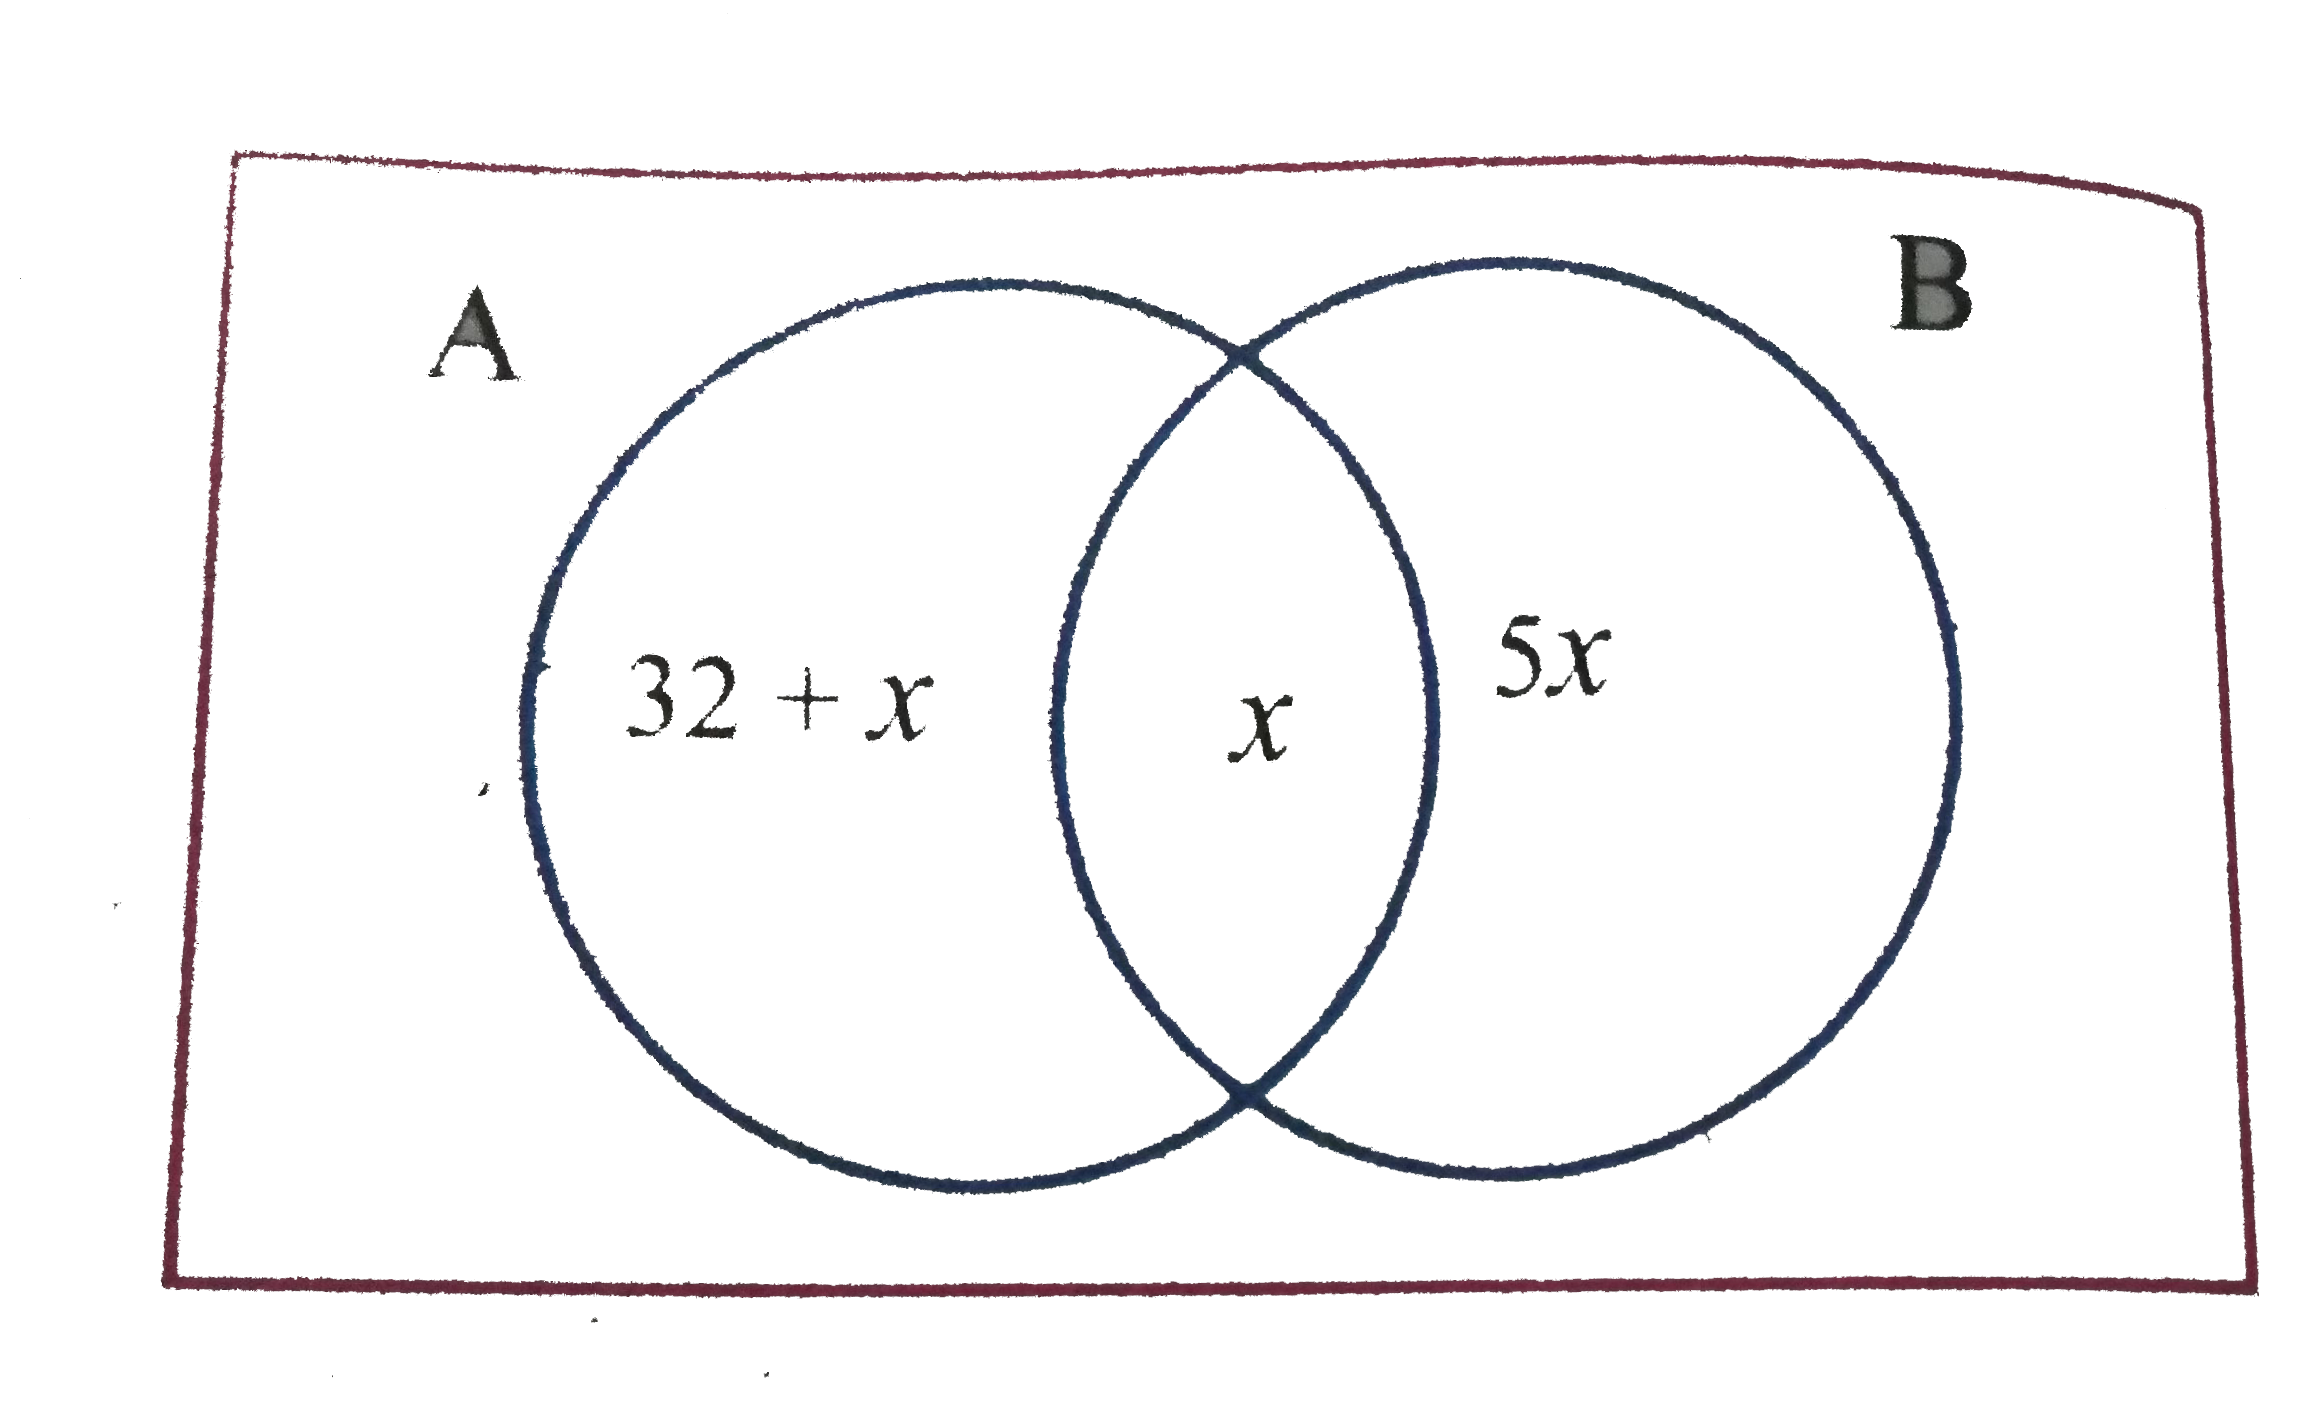 A and B are two sets such that n(A - B) = 32 + x, n(B - A) = 5x and n(AcapB)=x. Illustrate the information by means of a venn diagram. Given that n(A) = n(B), calculate the value of x.